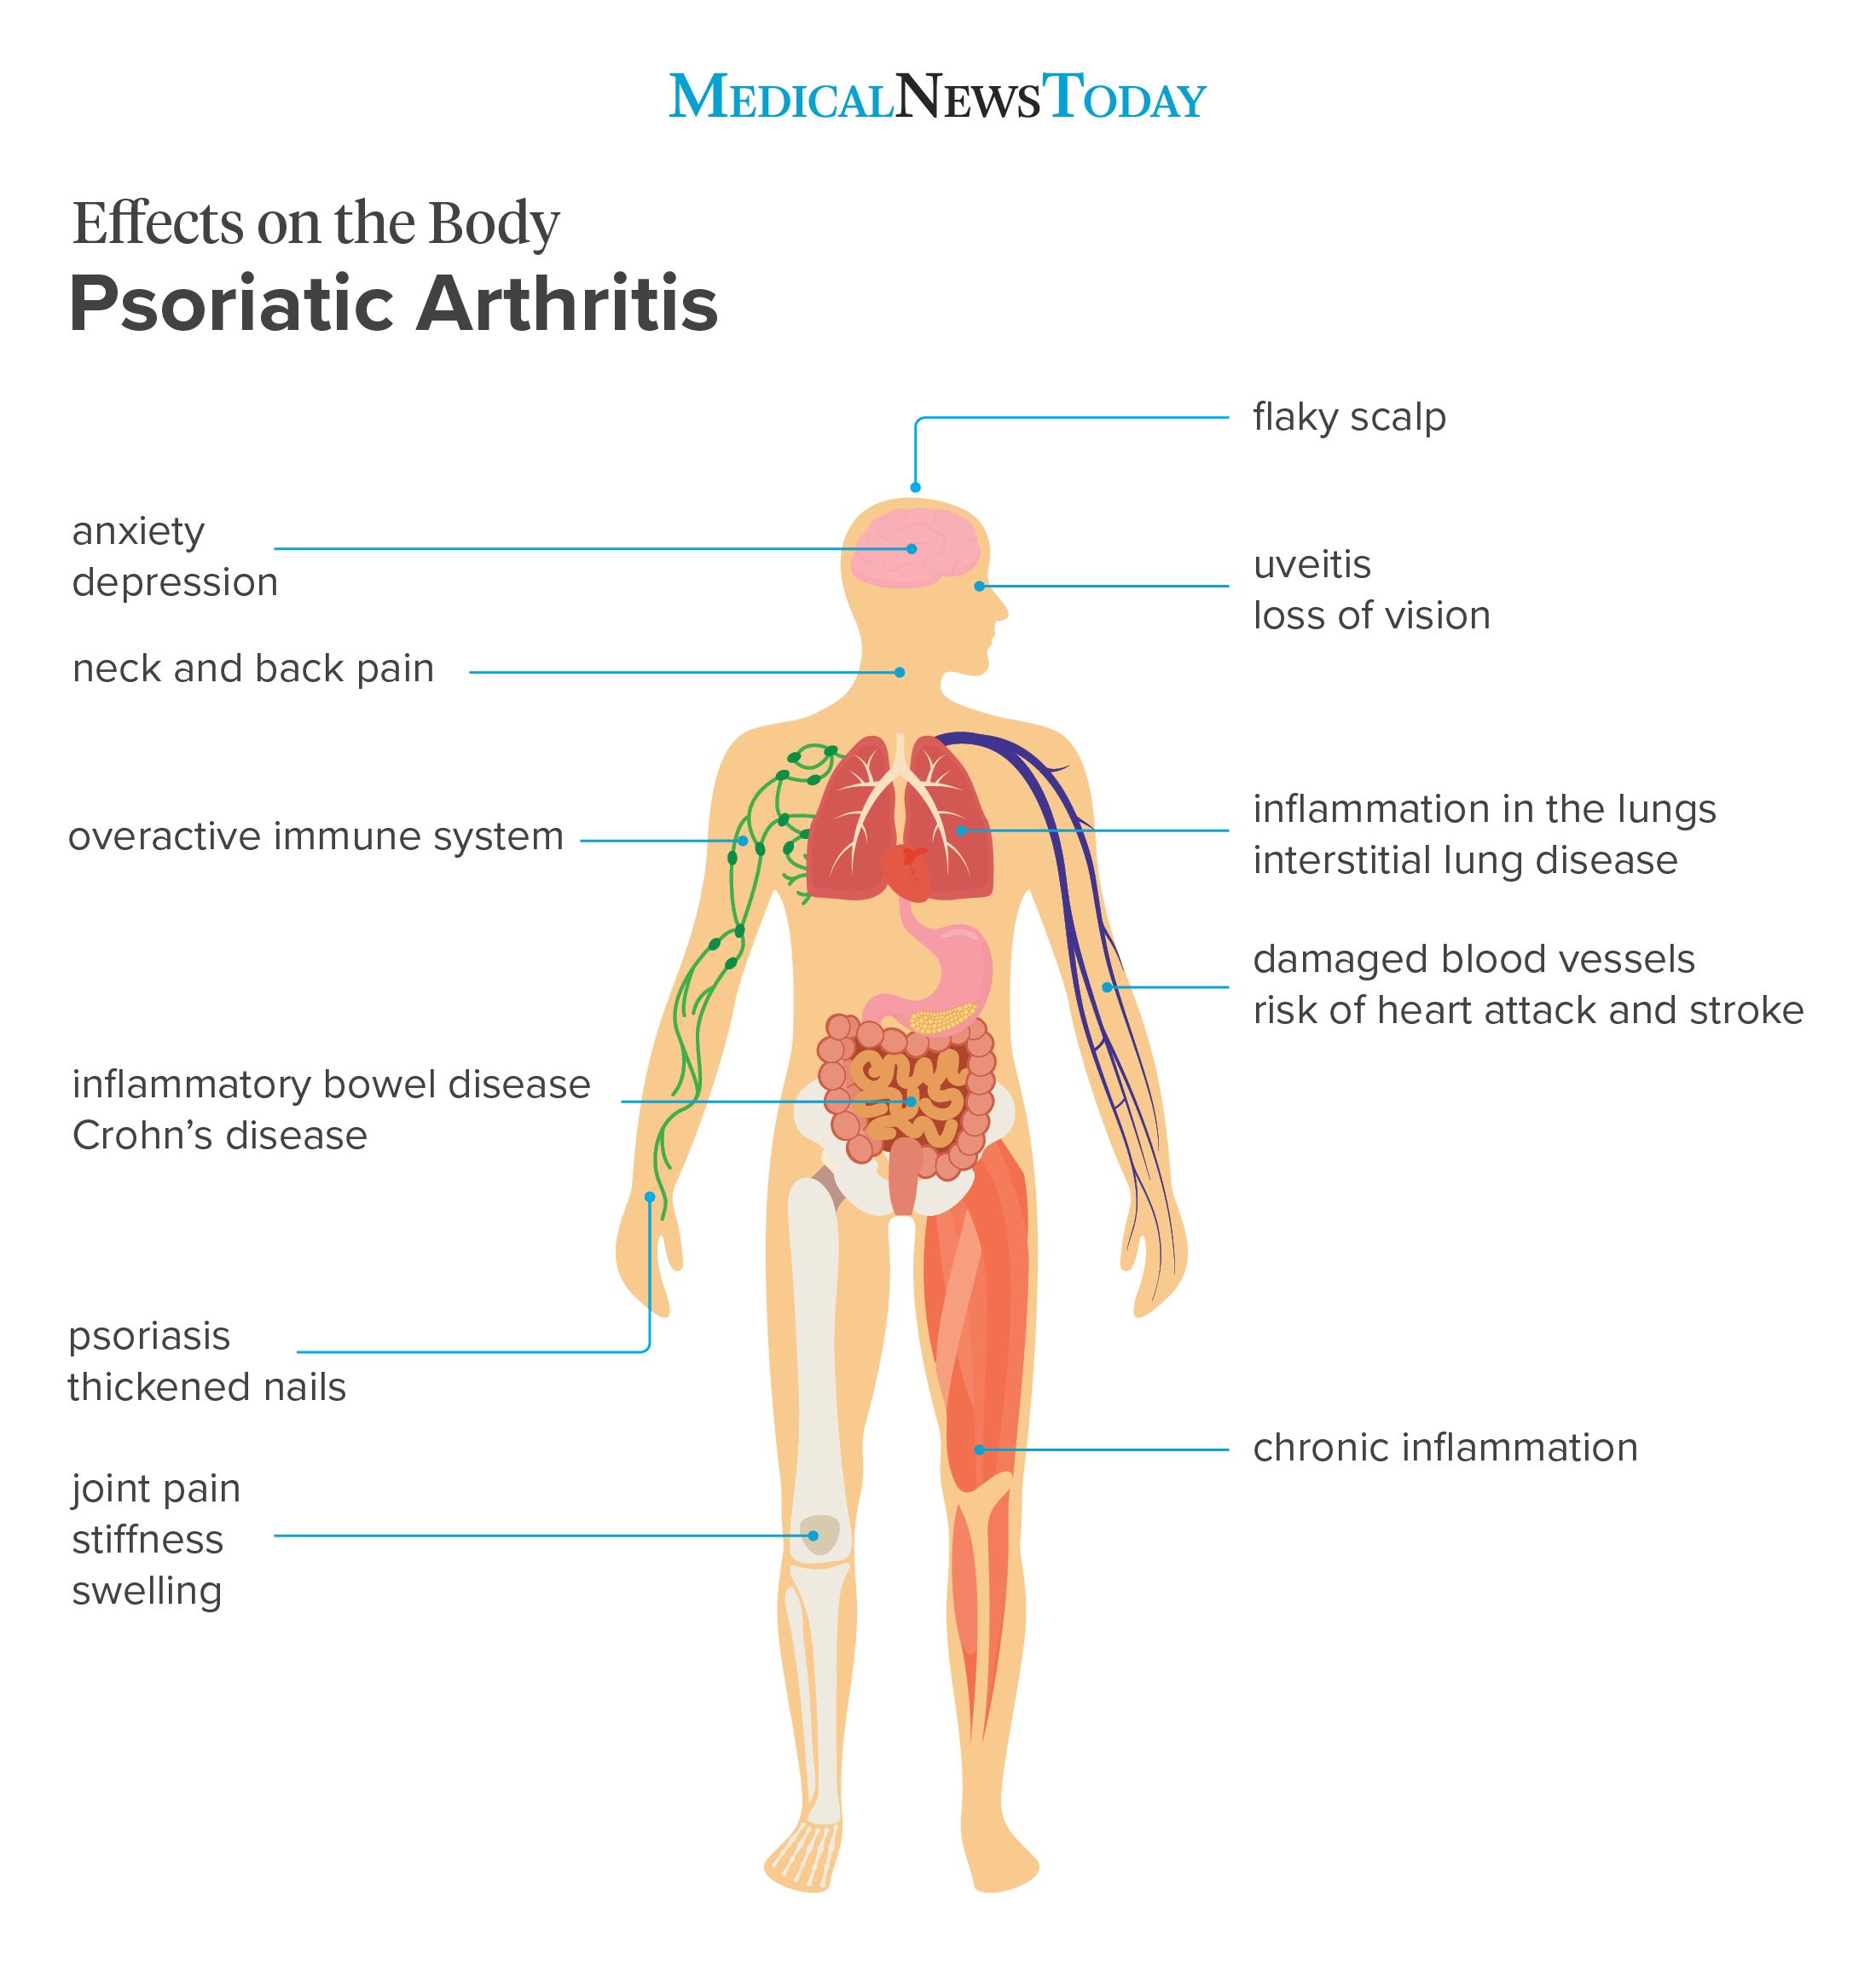 How does psoriatic arthritis affect the body?